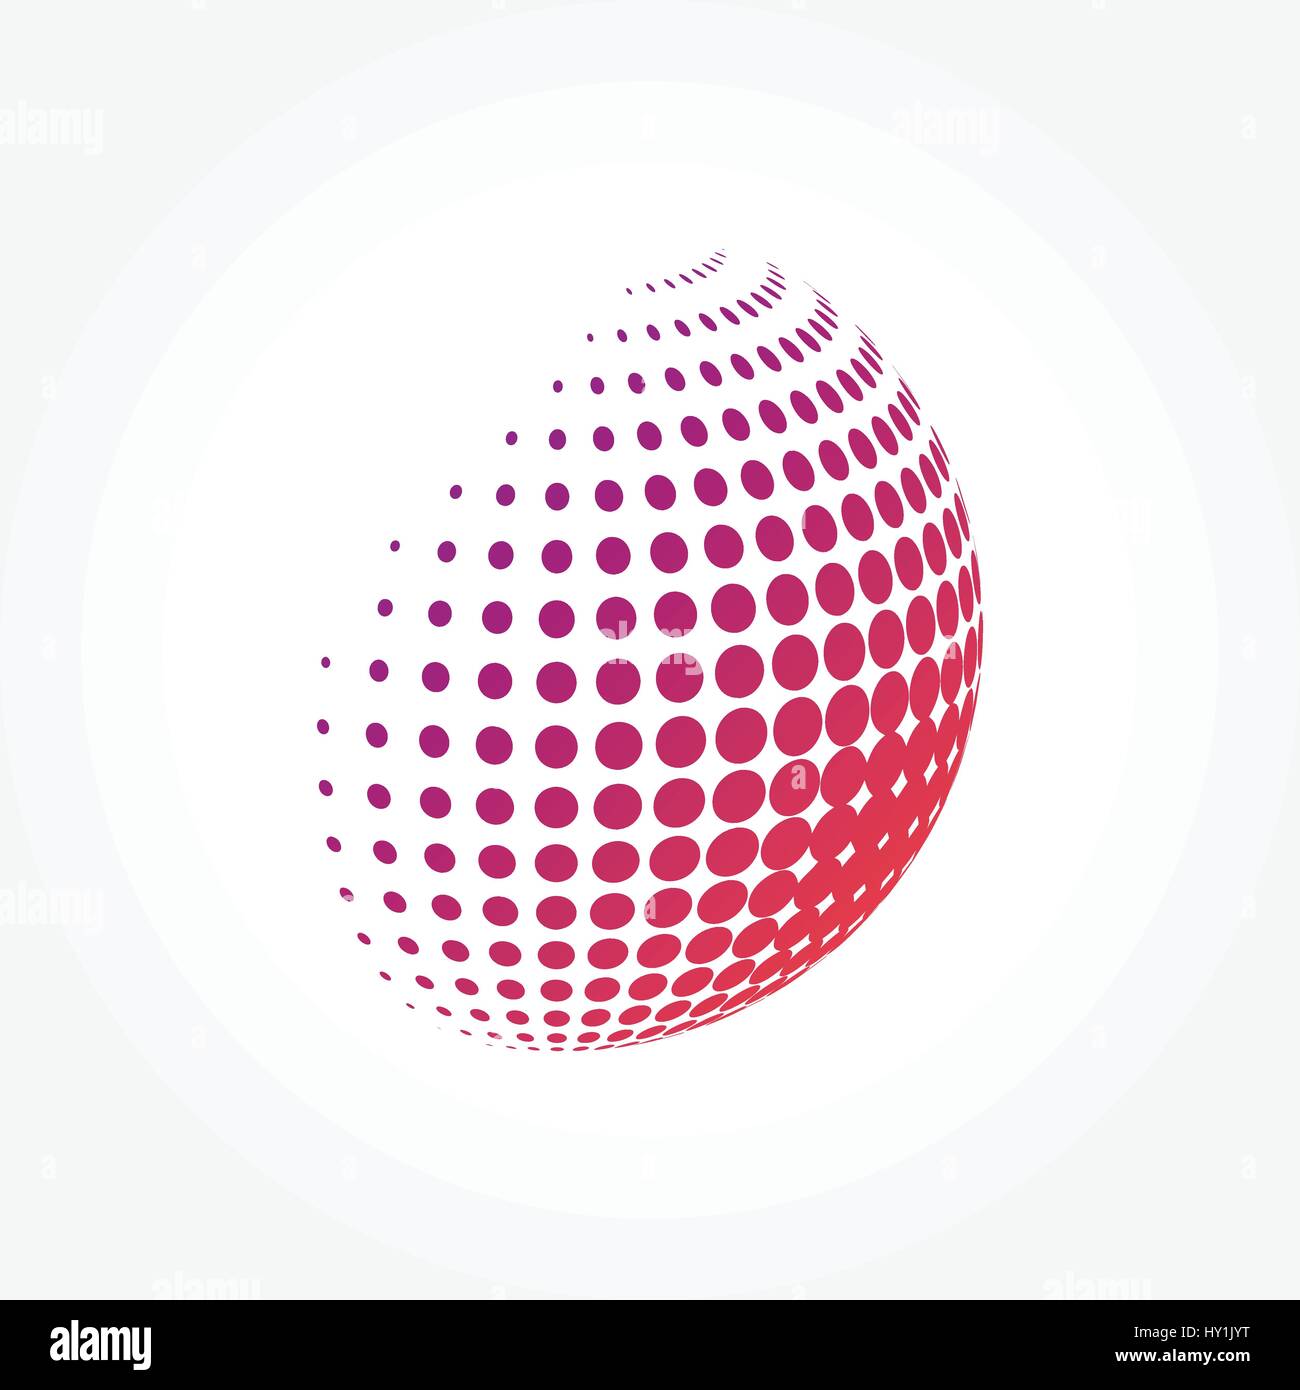 Stylized Globe with Dots Pixels Stock Vector